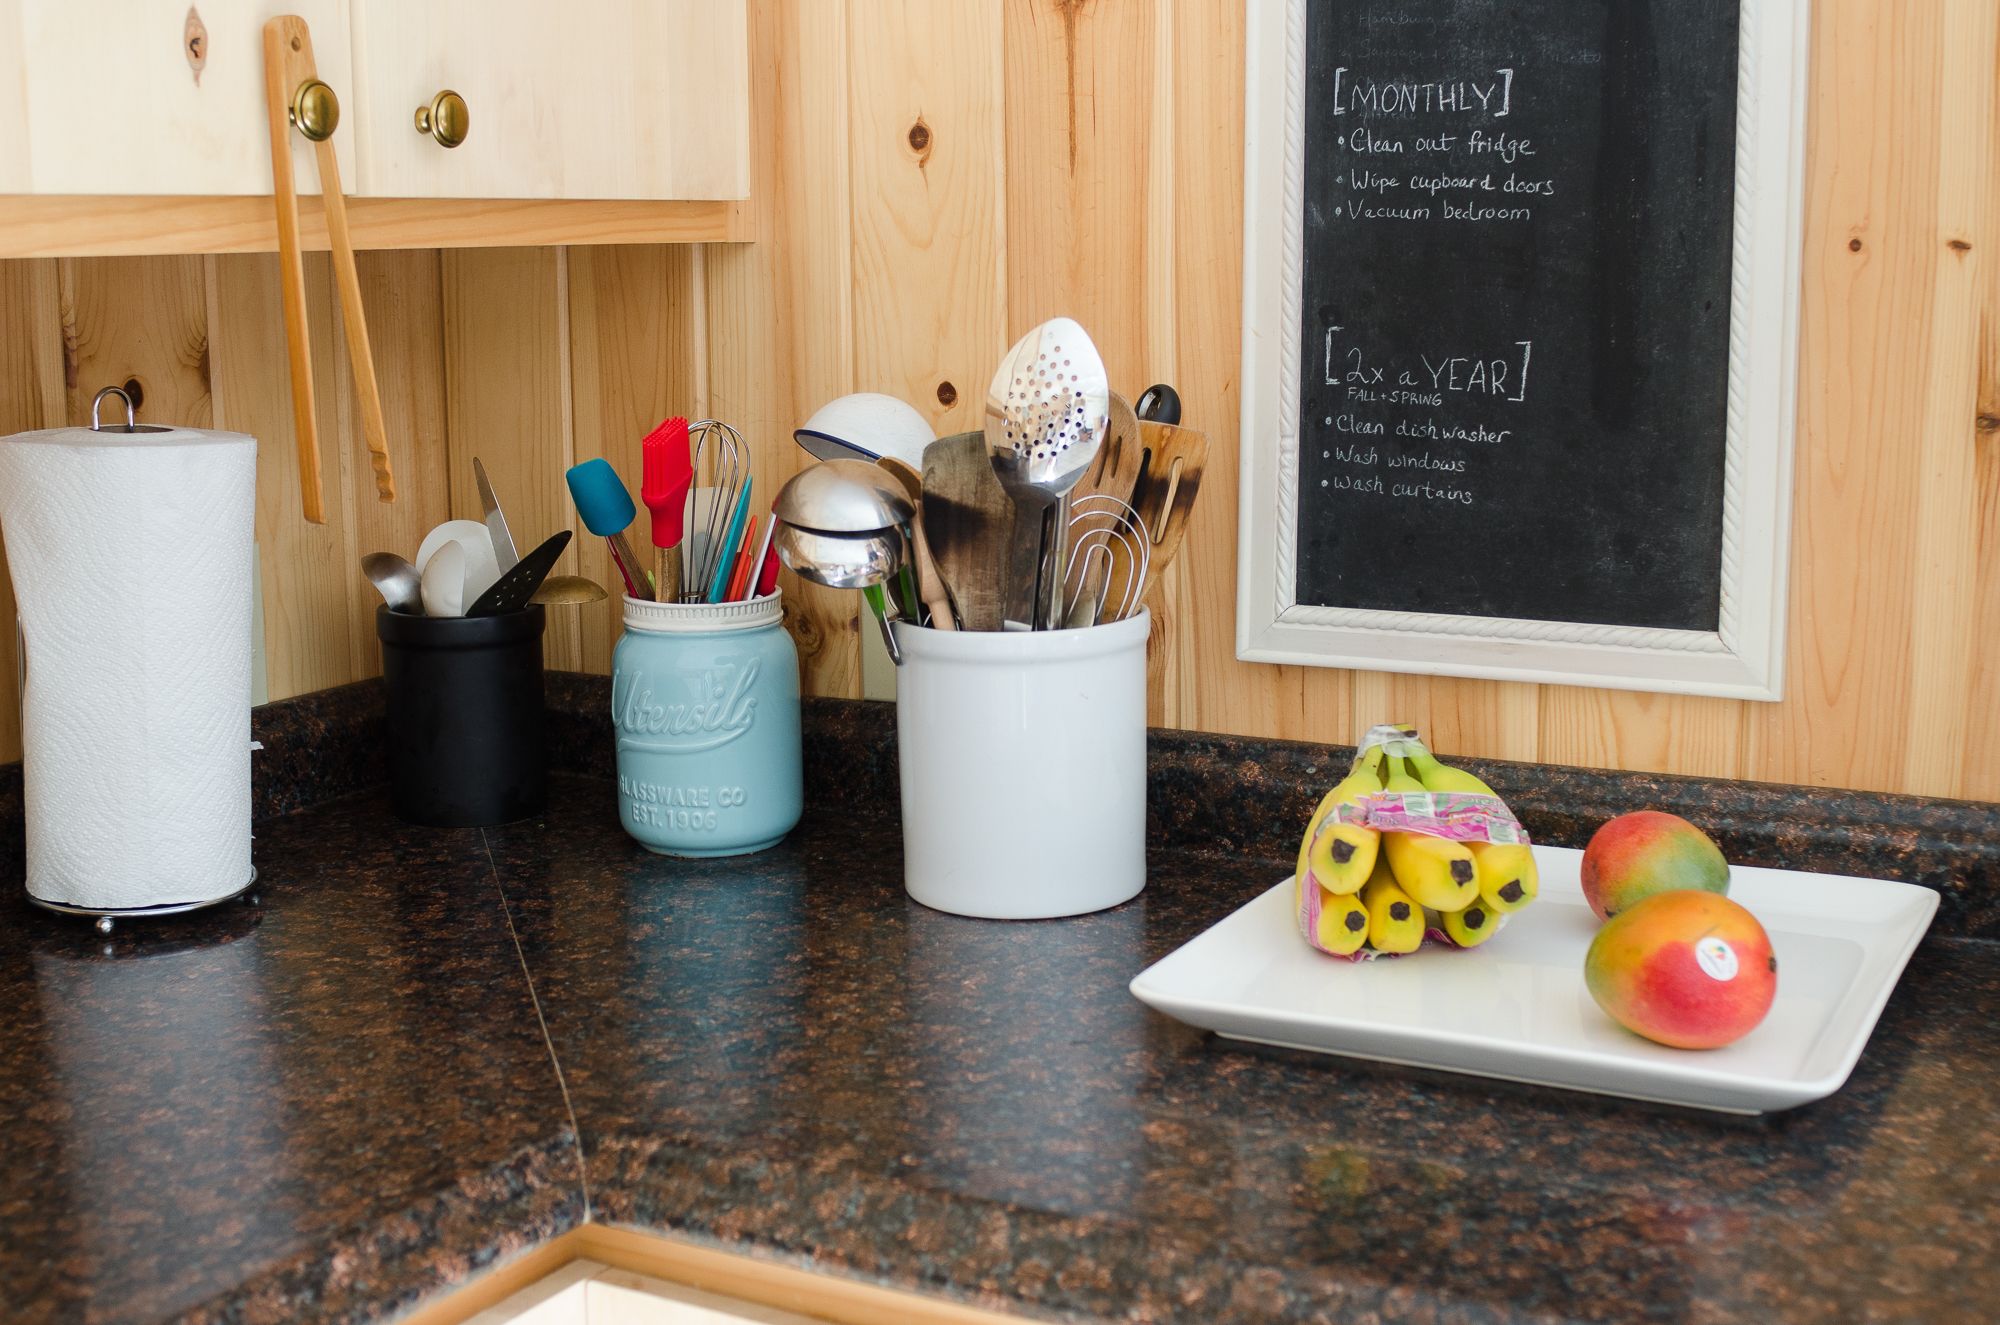 13 Steps for a Clean Kitchen, Home Matters